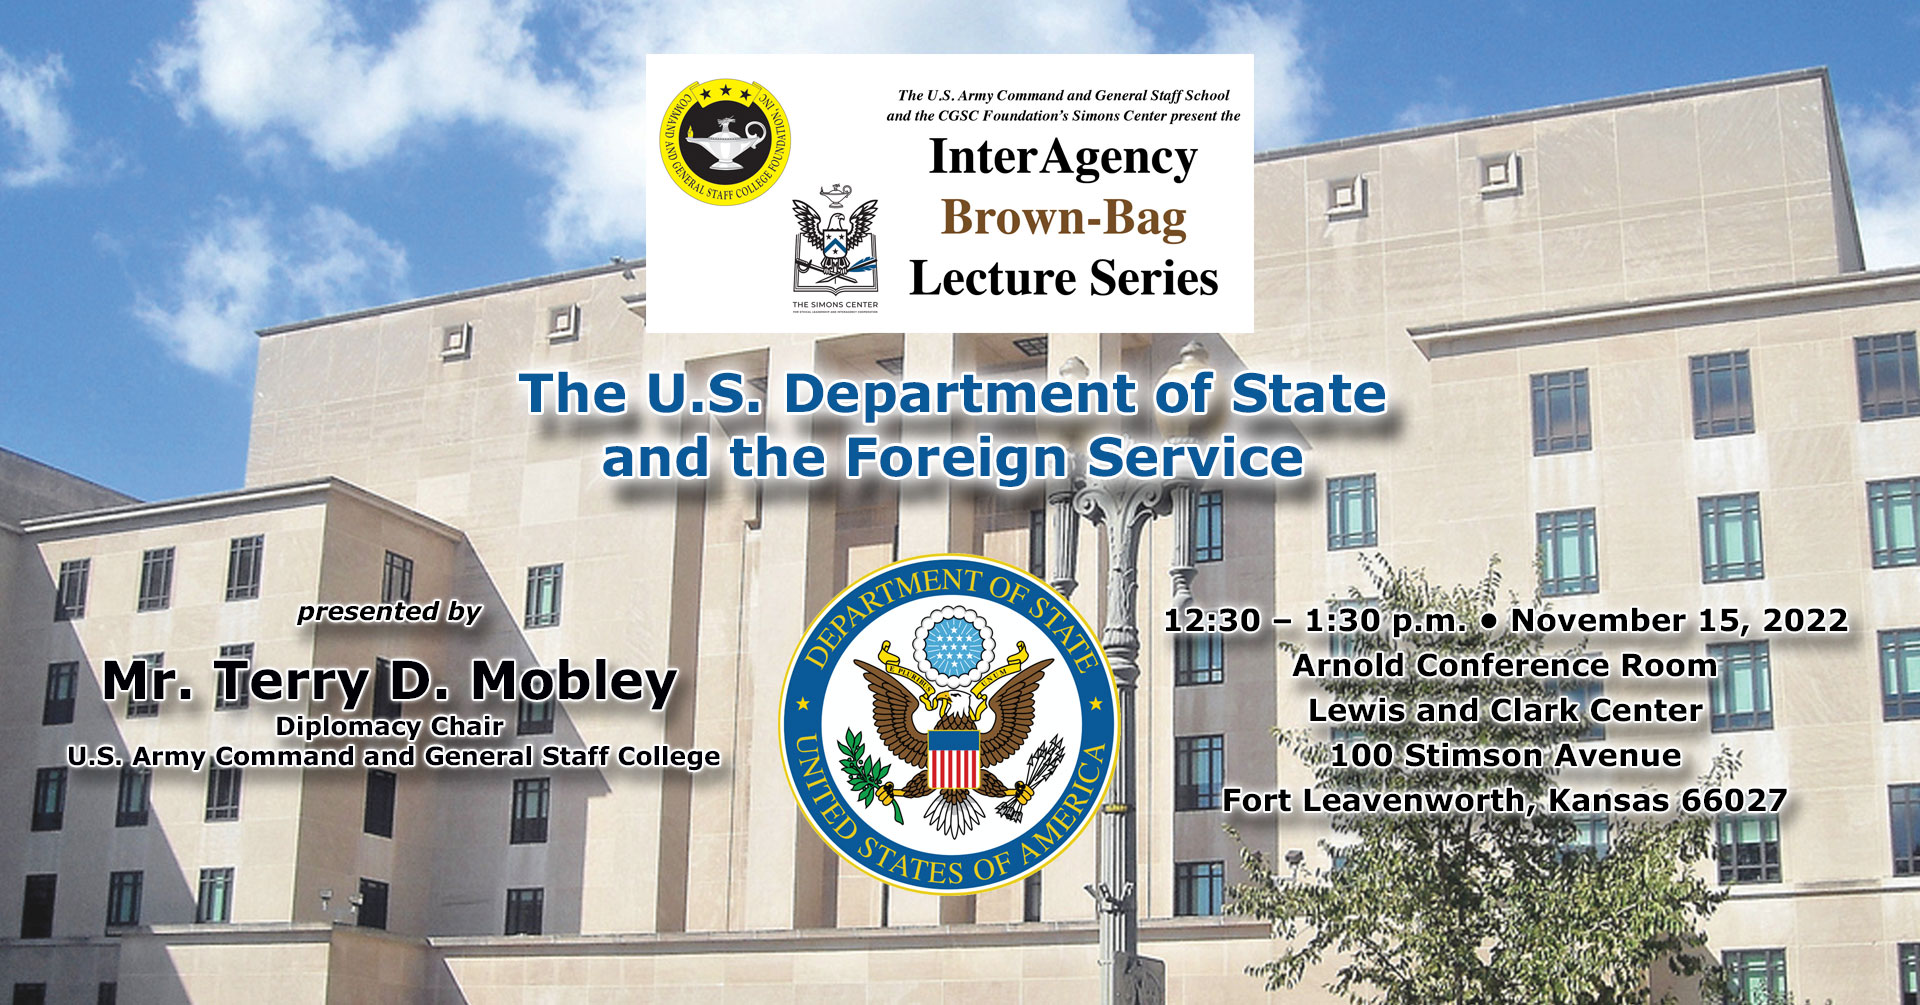 Photo of the U.S. Department of State in the background with the InterAgency Brown-Bag Lecture Series and the State Department Seal overlaid along with the date/time of the next brown-bag lecture on Nov. 15,2022 focused on the State Department.